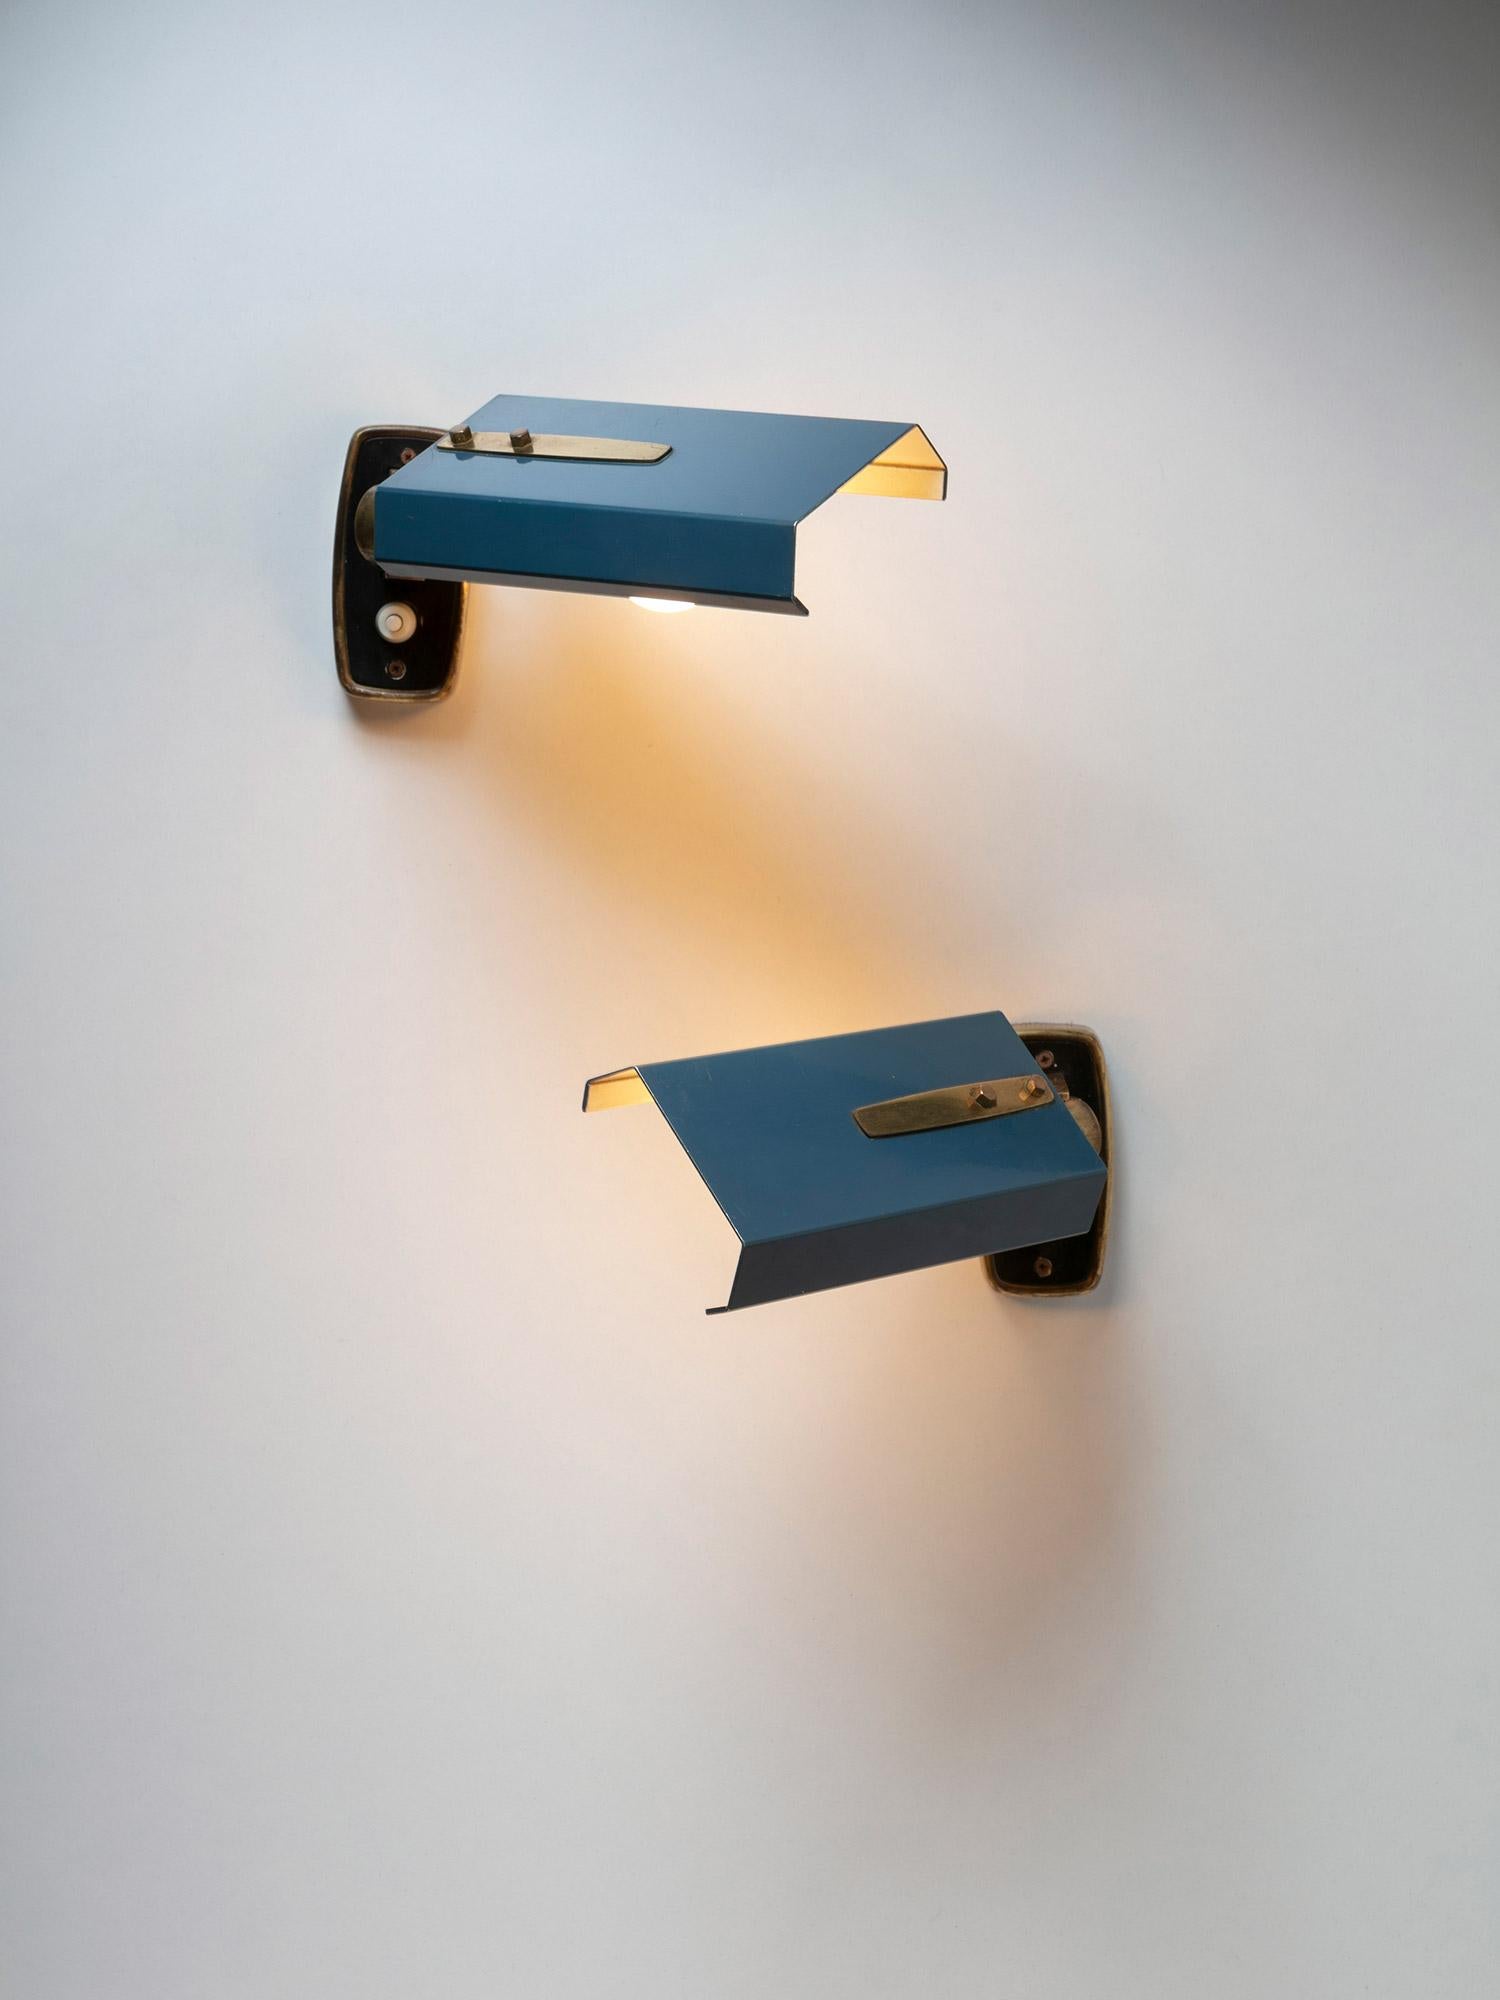 Set of two model 2133 wall spot lights by Stilnovo
Adjustable light blue shade with brass details.